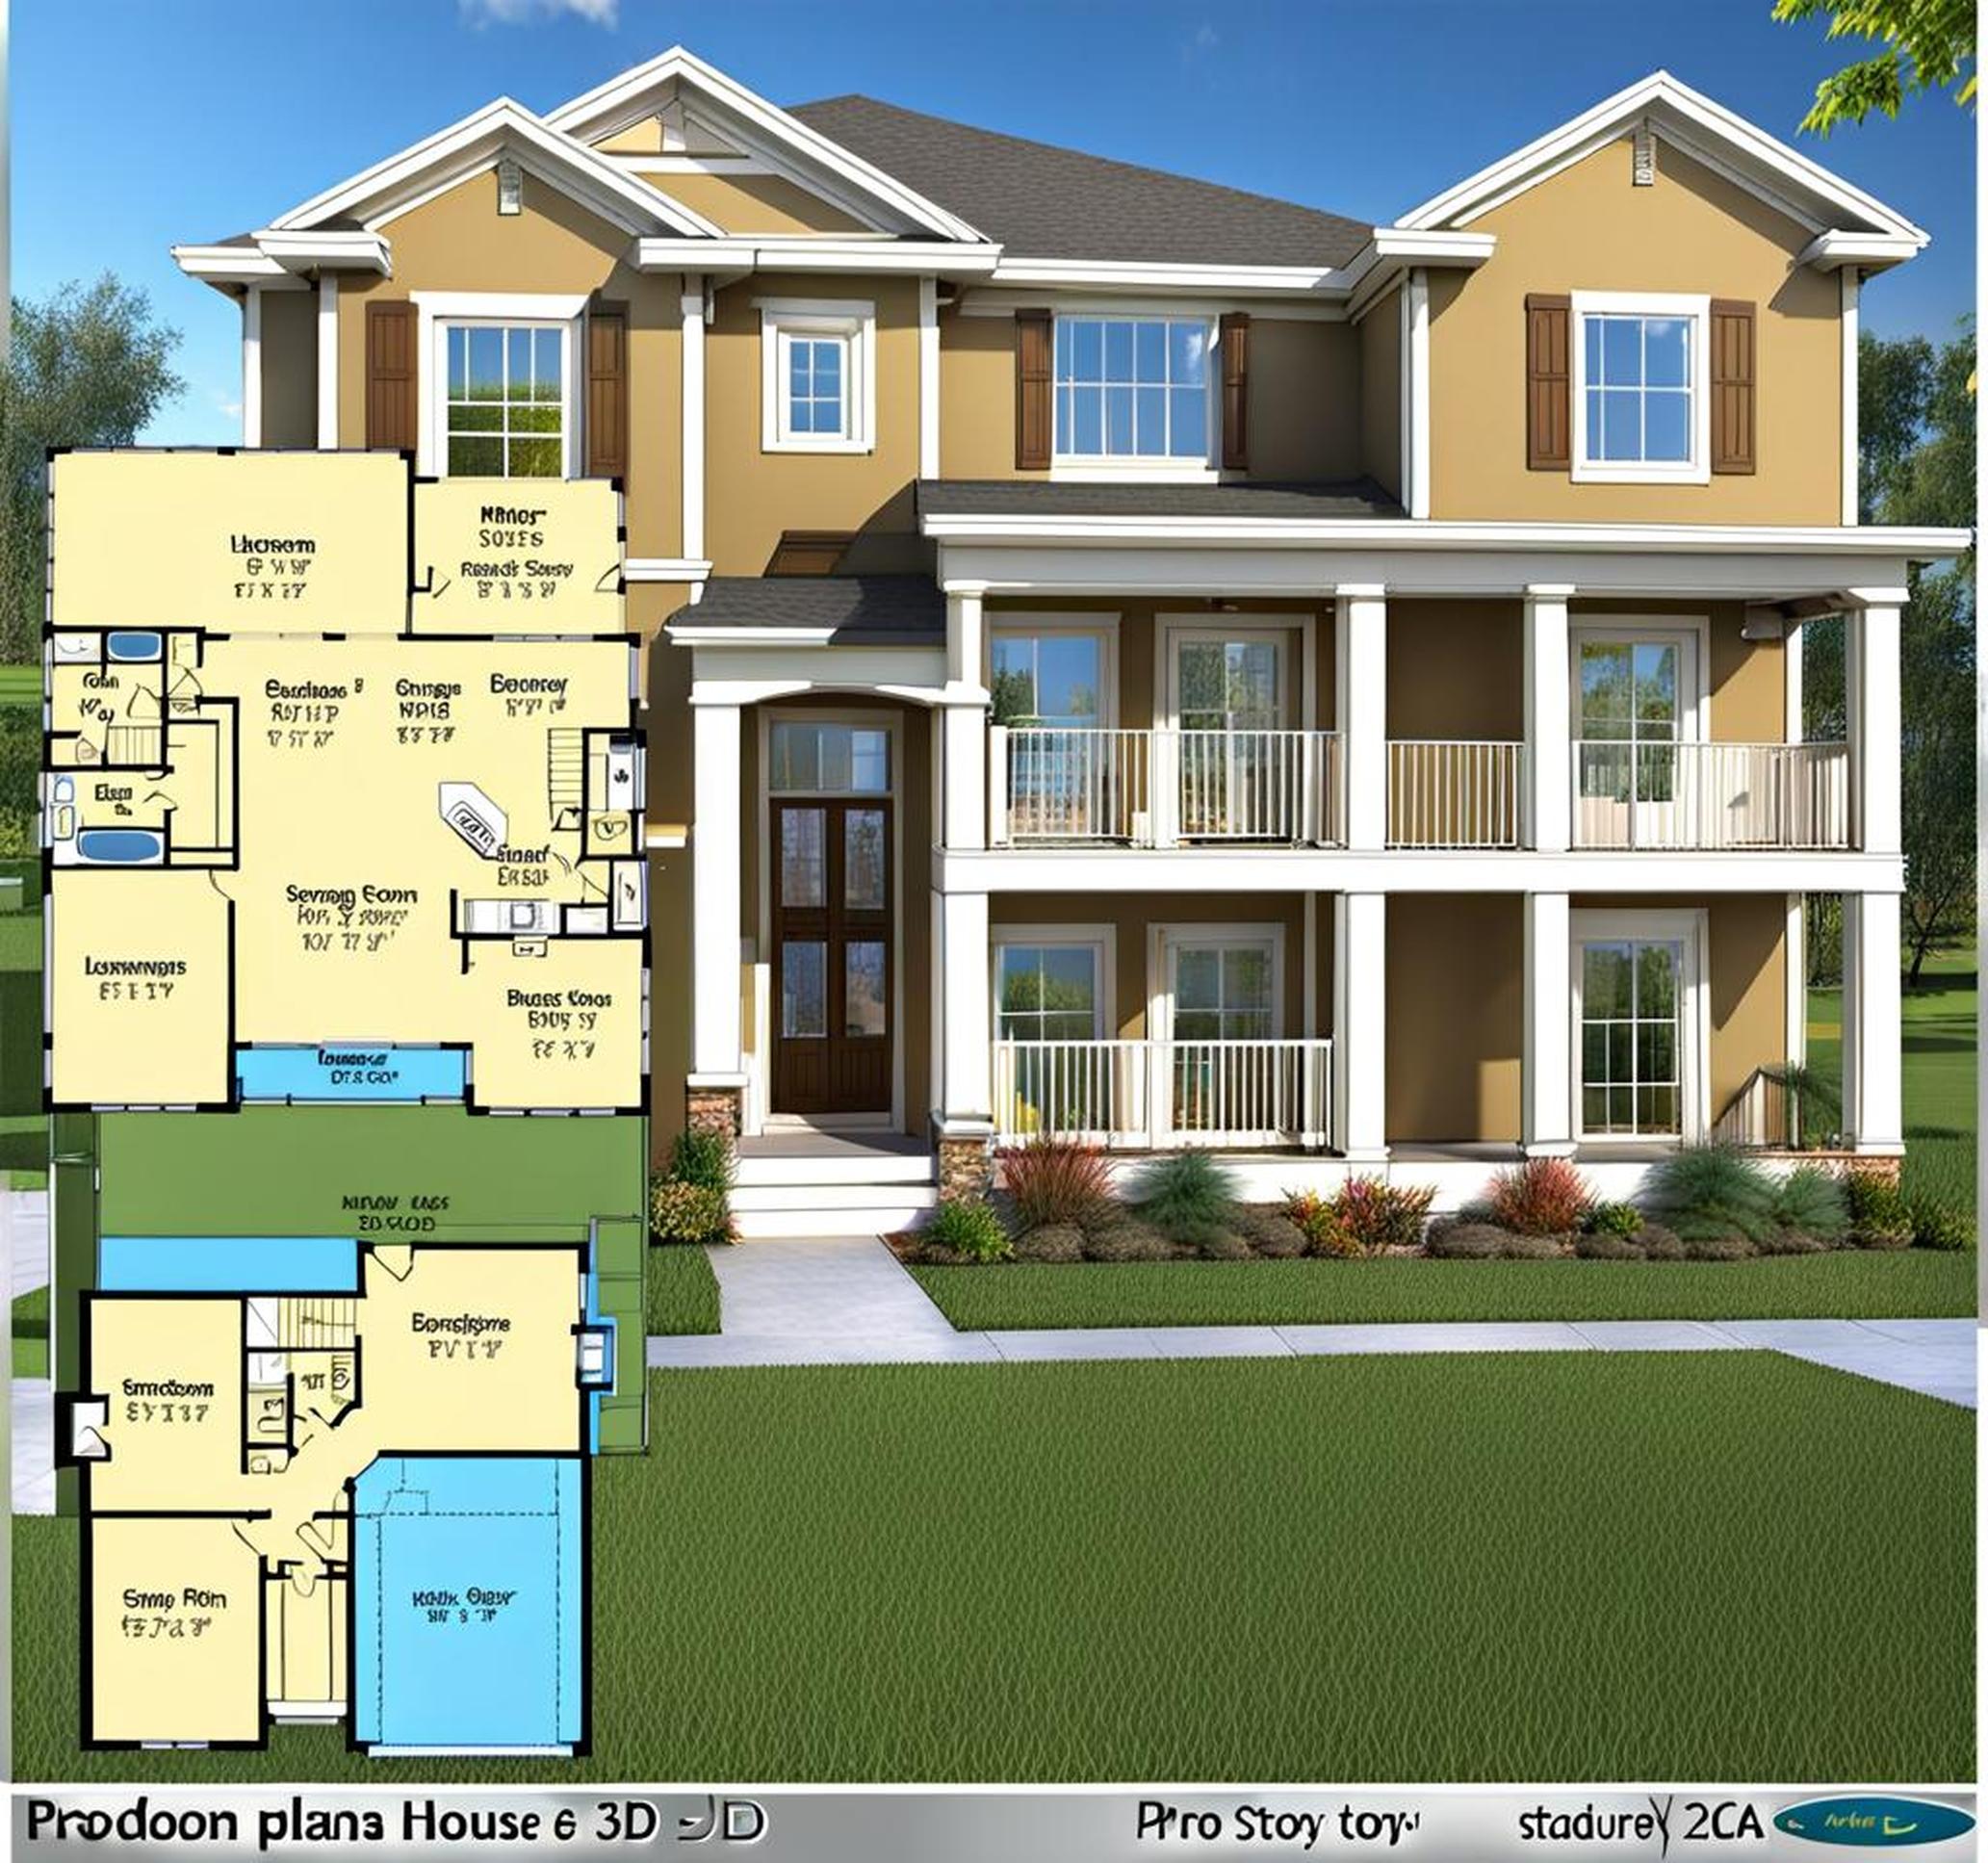 5 bedroom house plans 2 story 3d